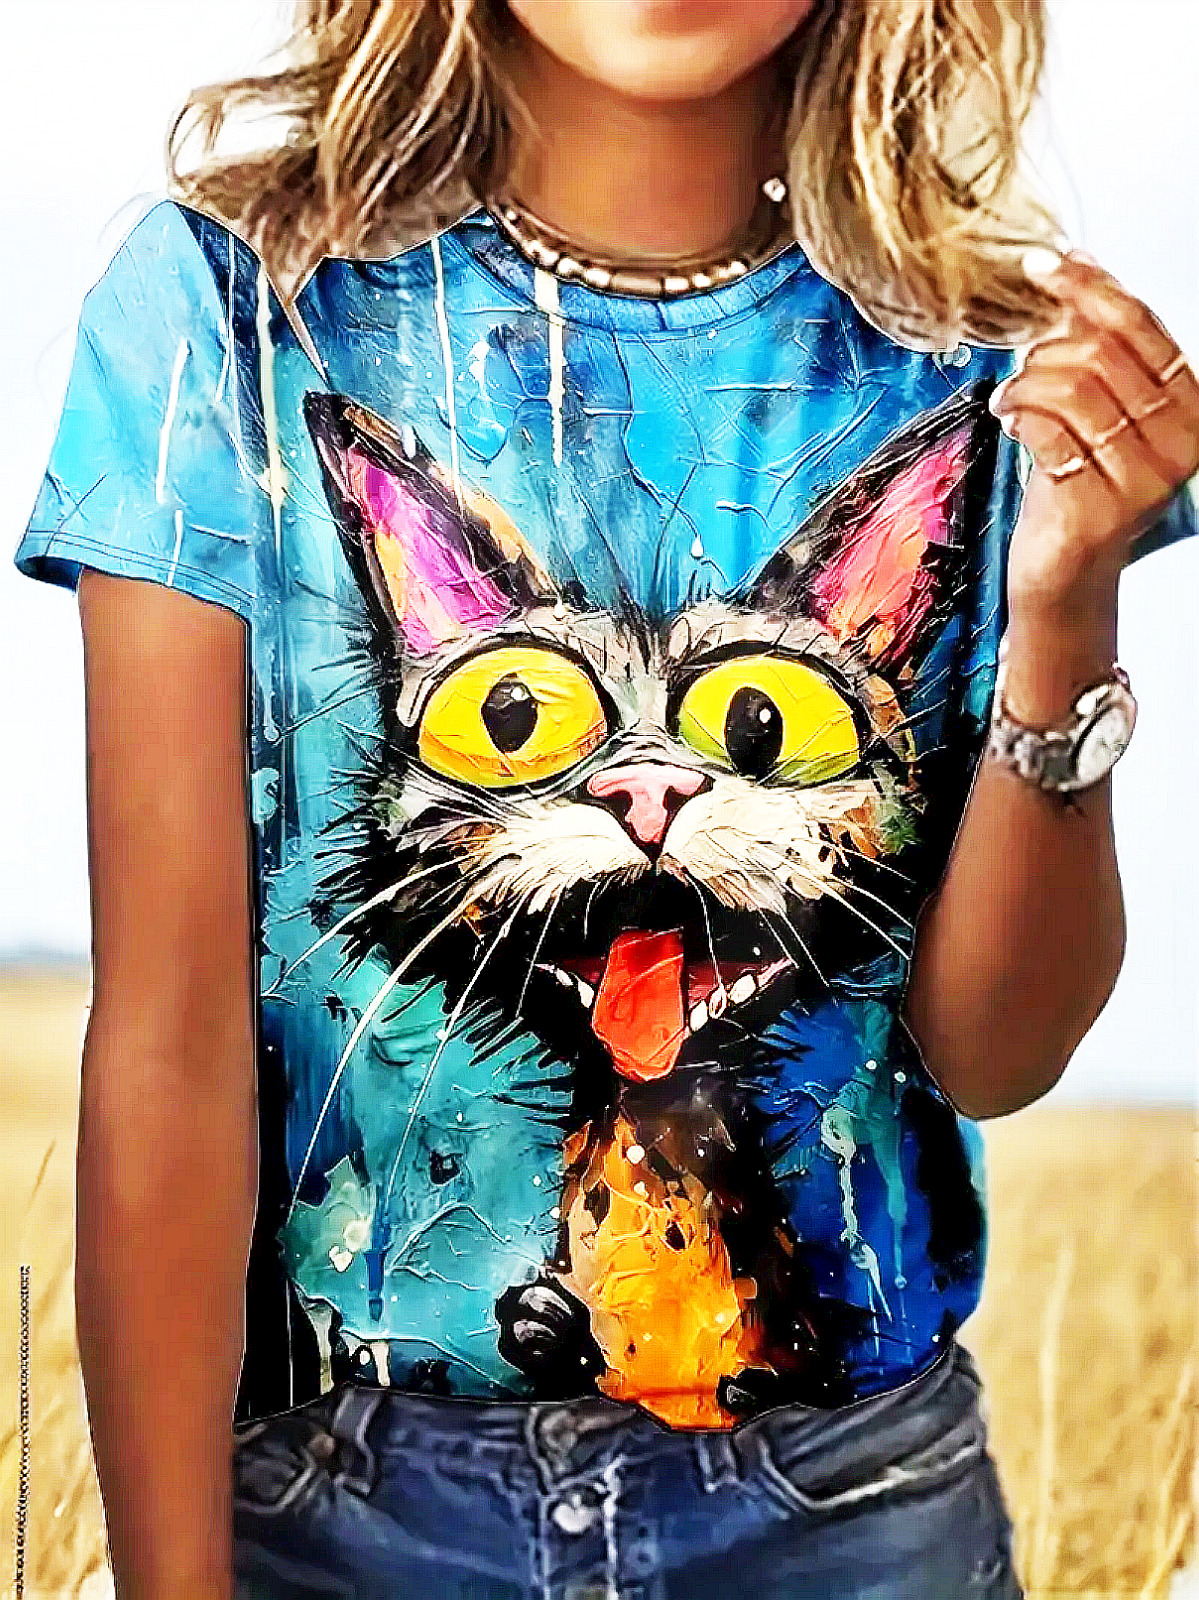 Lady\'s Bright & Colorful Playful Cartoon Crazy Cat T-Shirt SZ. 12 -FREE SHIPPING